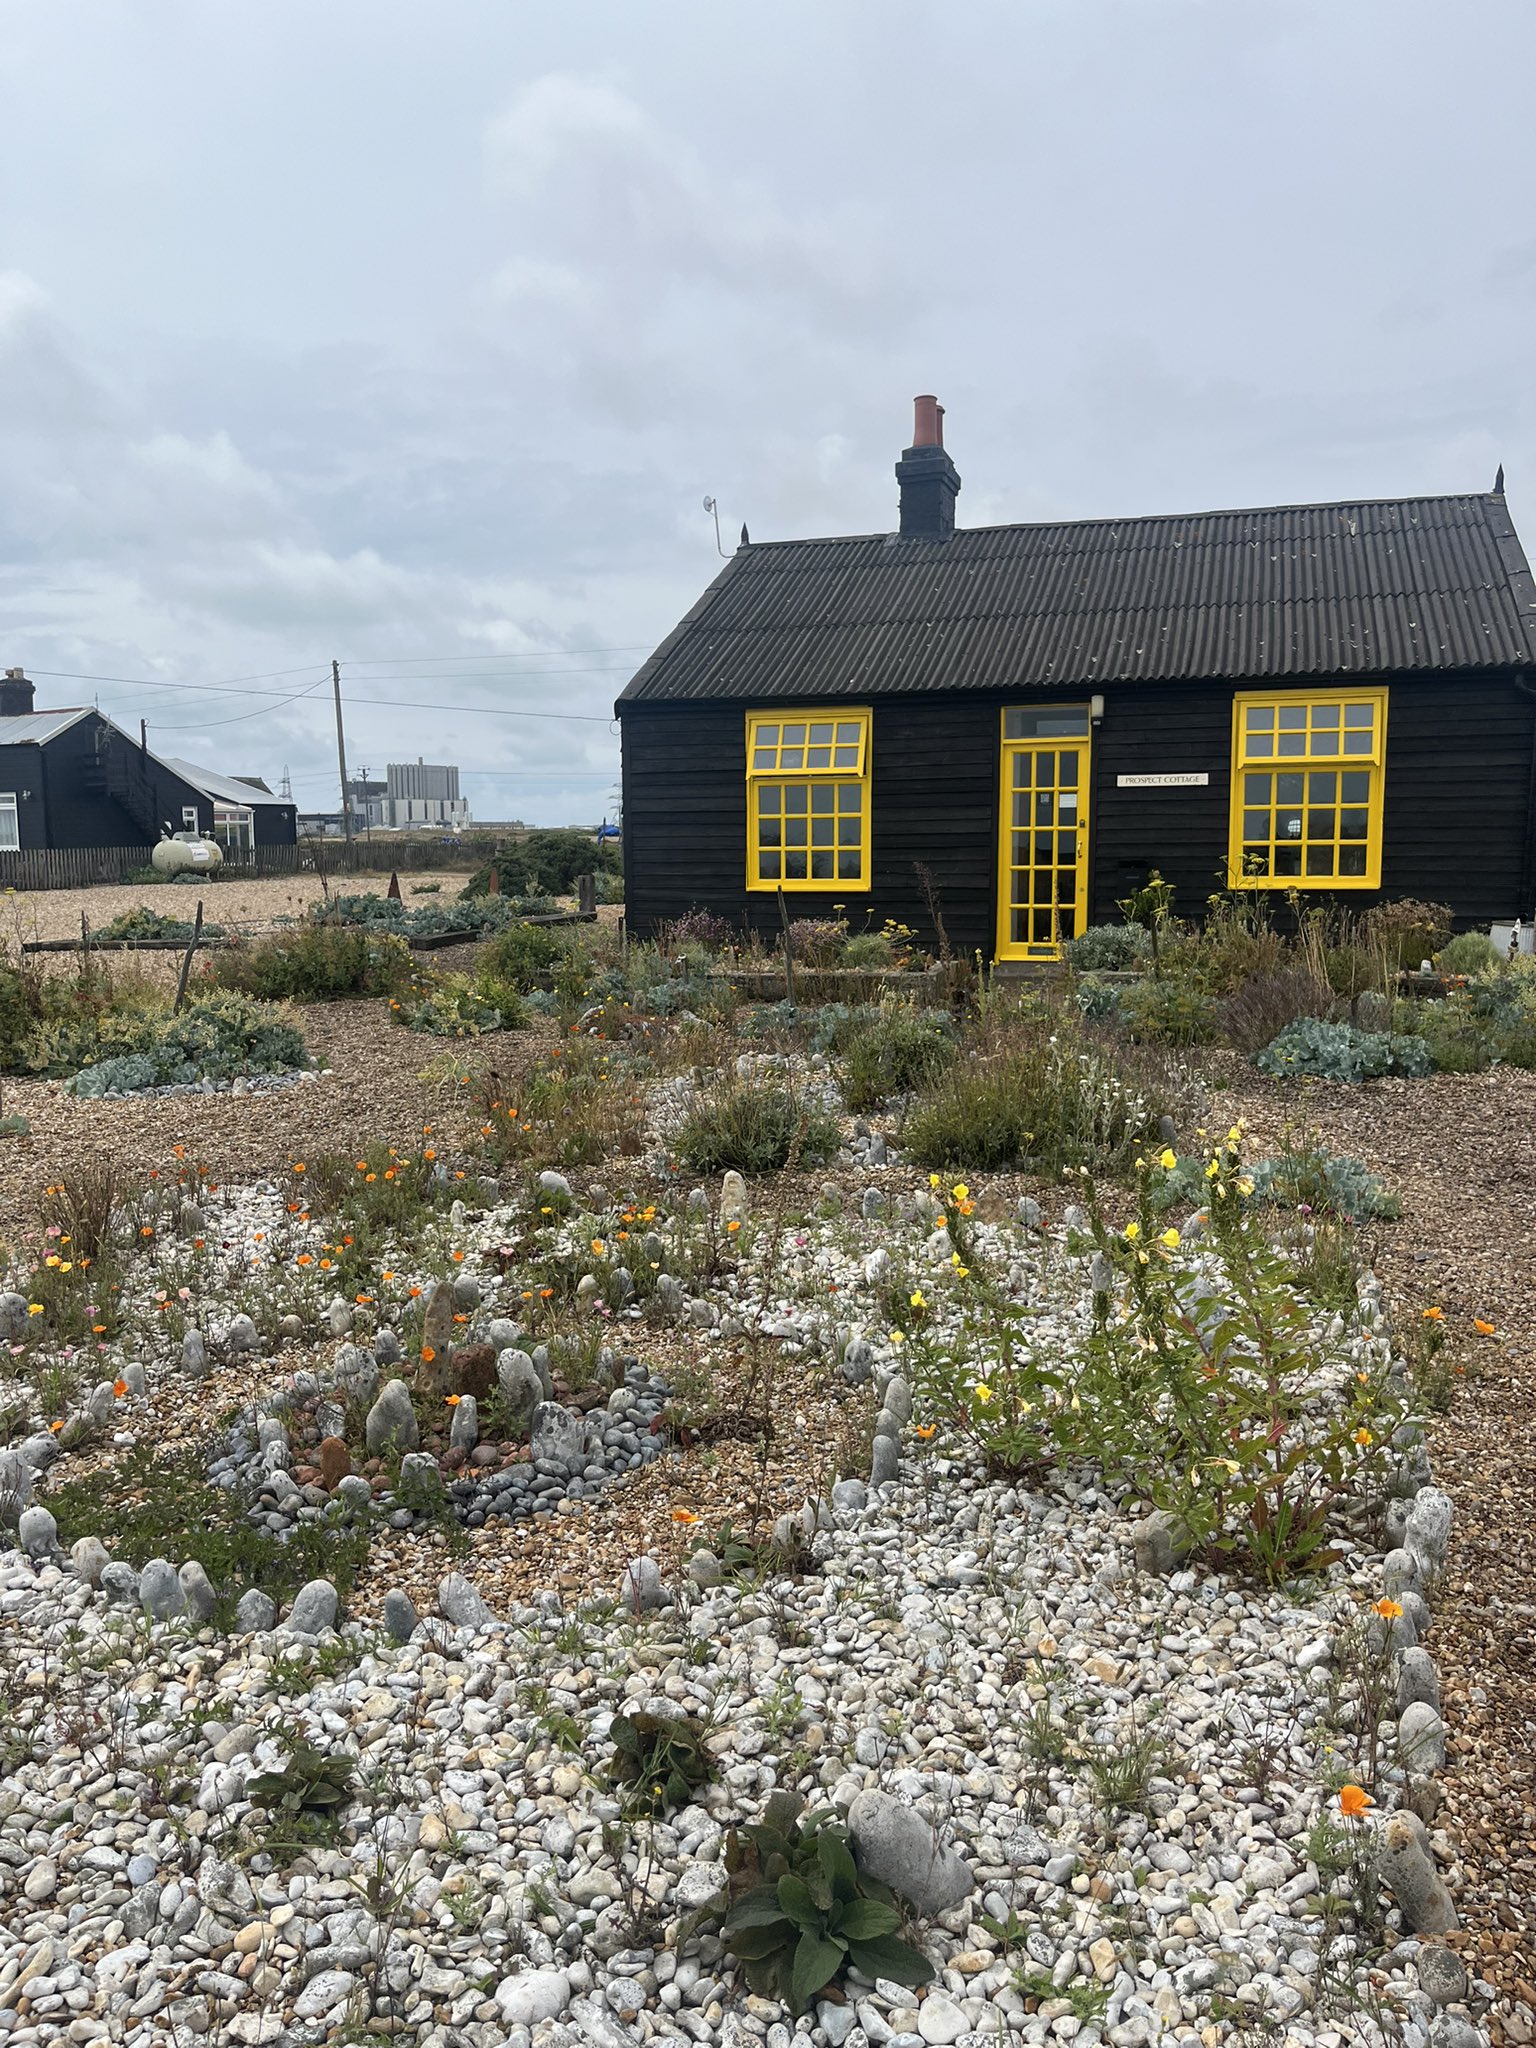 Prospect Cottage, home of the late queer artist and filmmaker Derek Jarman.  A bitumen tar painted cottage with yellow windows. A garden of cactus, stone and more local flowers spreads in front of it.